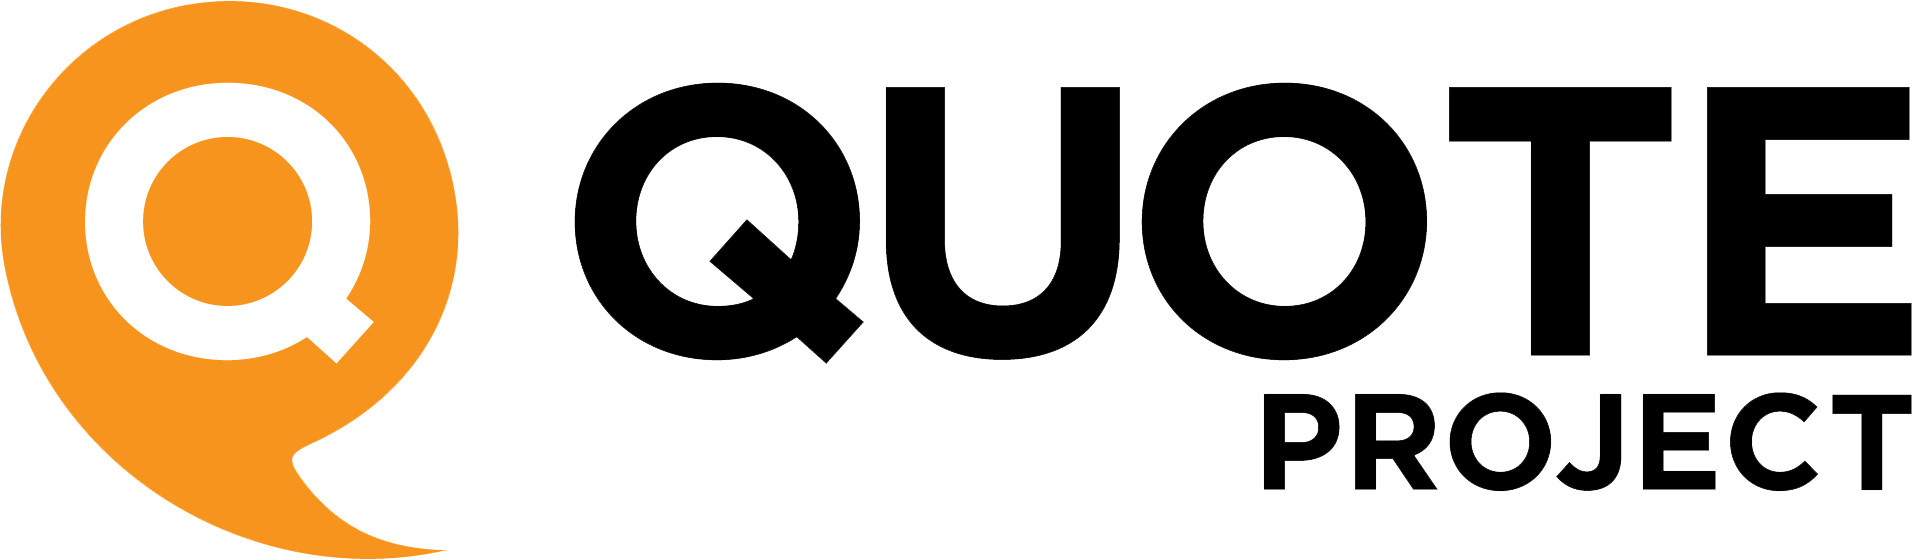 quote project logo